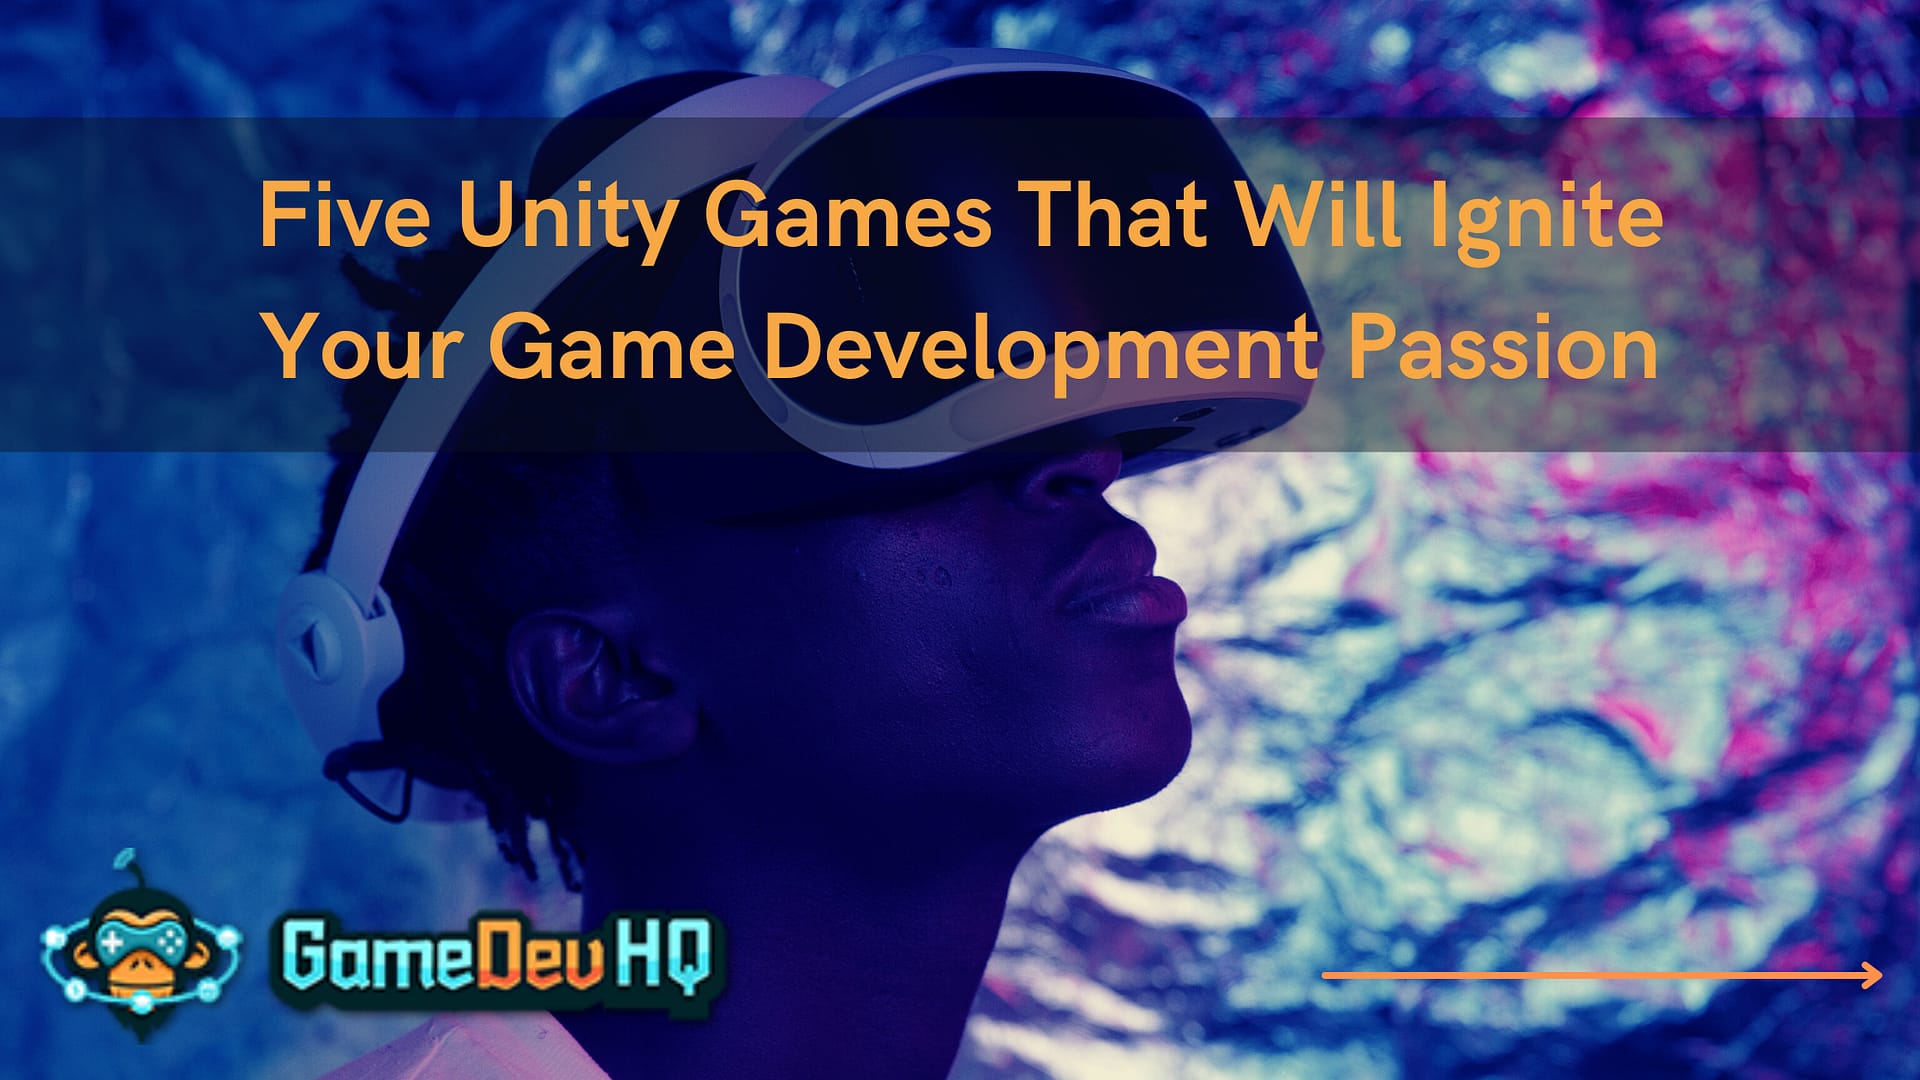 Five Unity Games That Will Ignite Your Game Development Passion